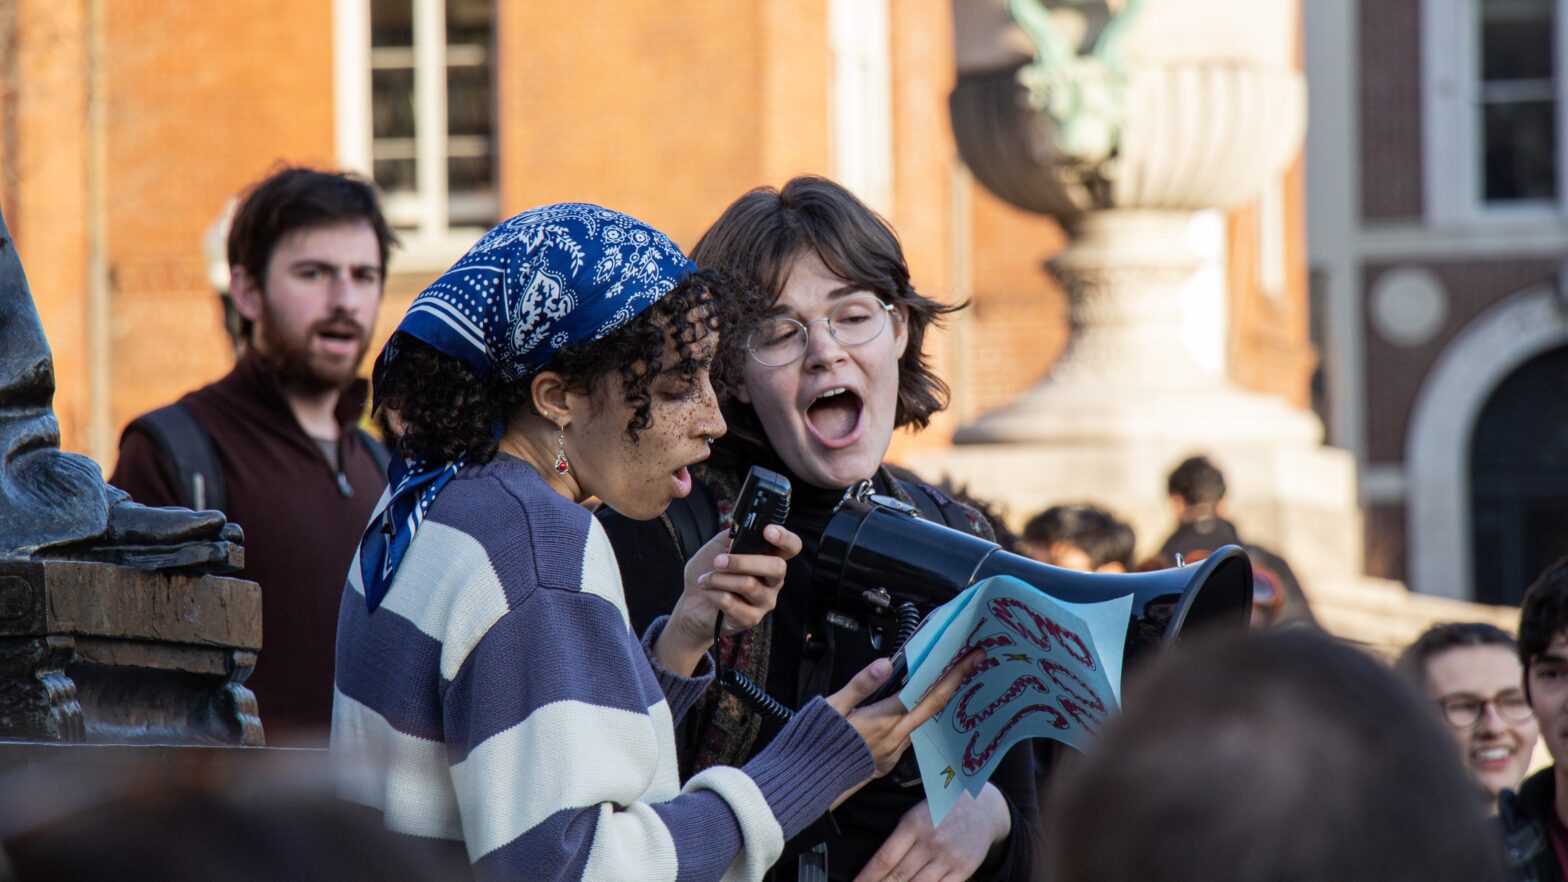 Two young women passionately speak into a bullhorn to a crowd. The one on the left has curly black hair tied back by a blue and white bandana, and is wearing a blue and white striped sweater. The woman on the right has short brown hair and a backpack on.